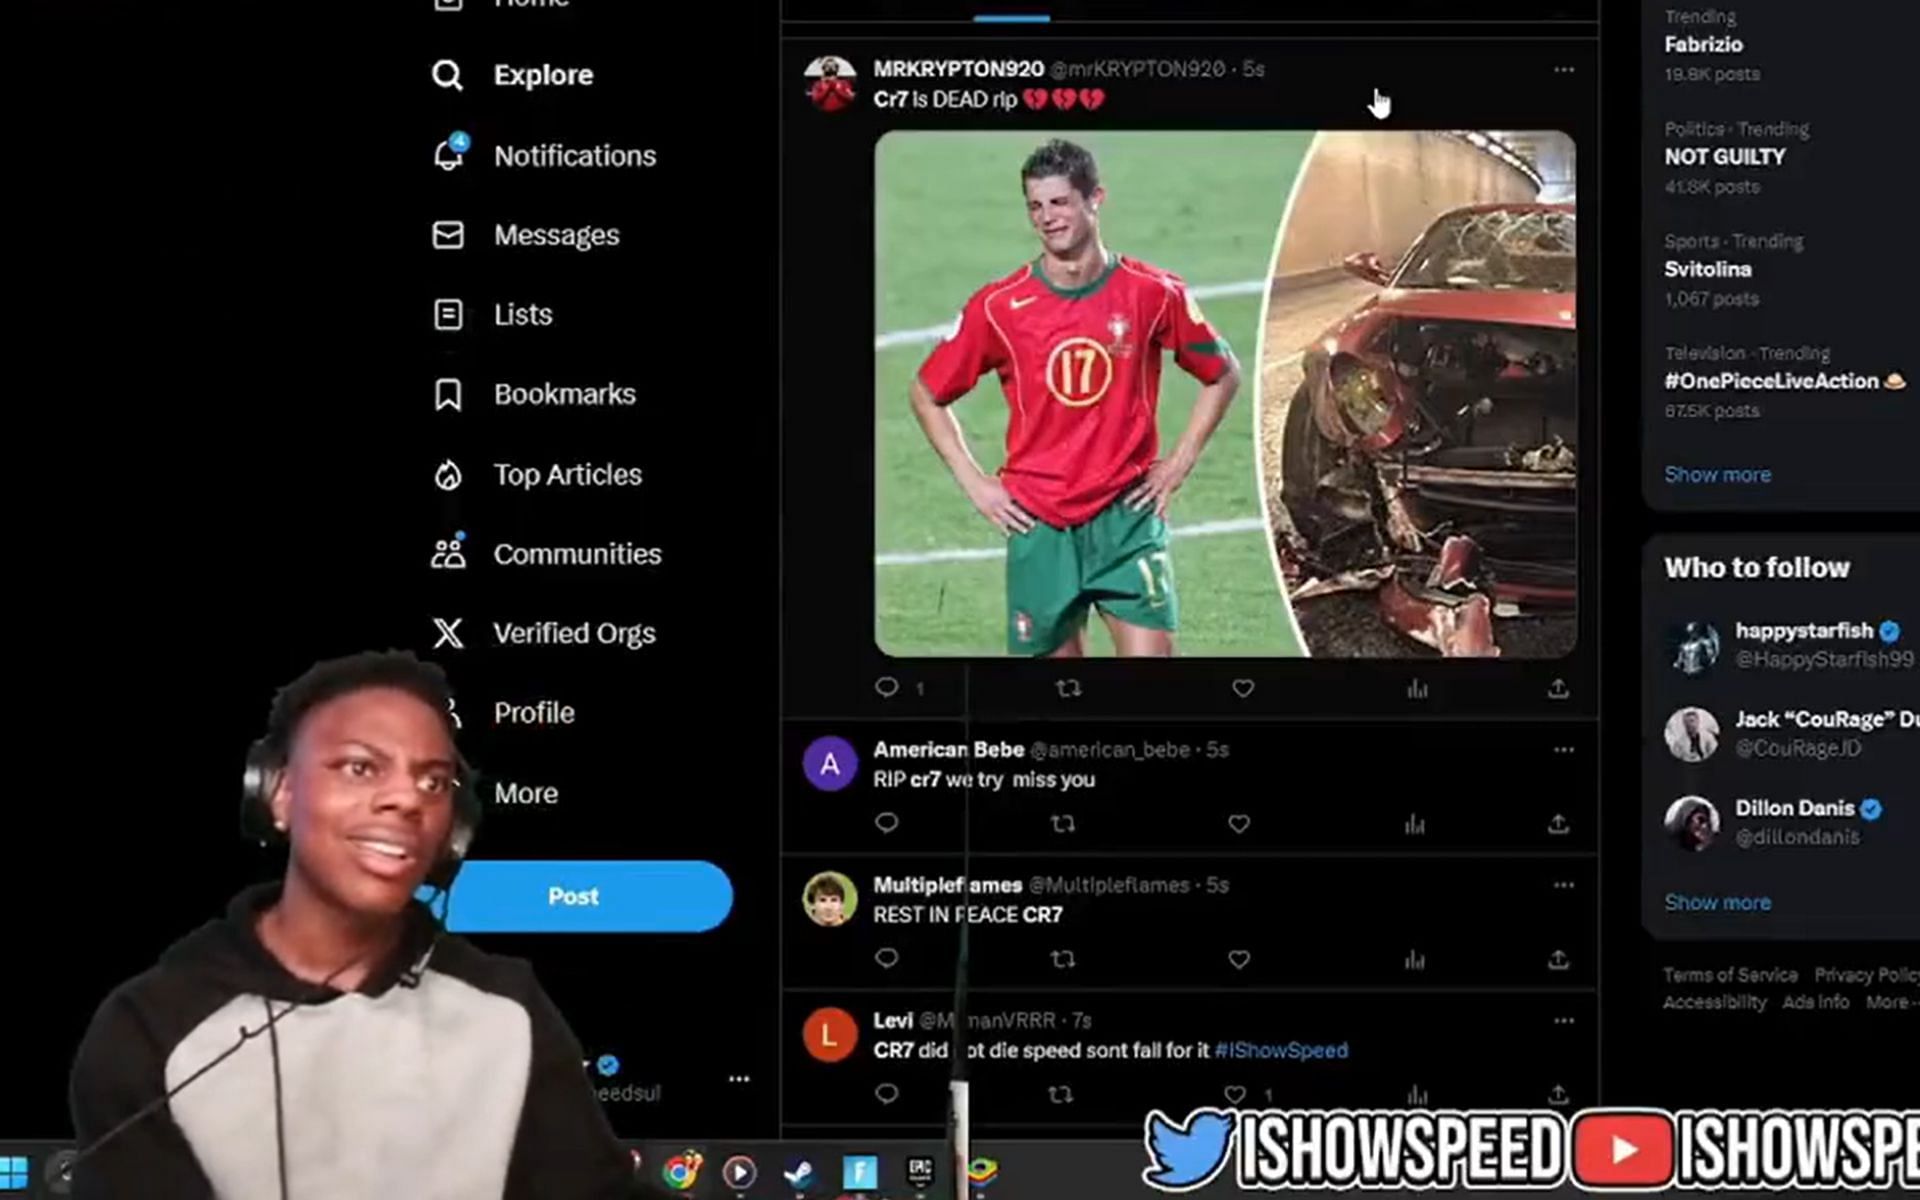 iShowSpeed finally sees Cristiano Ronaldo play live, stream ends in  disaster - Dexerto